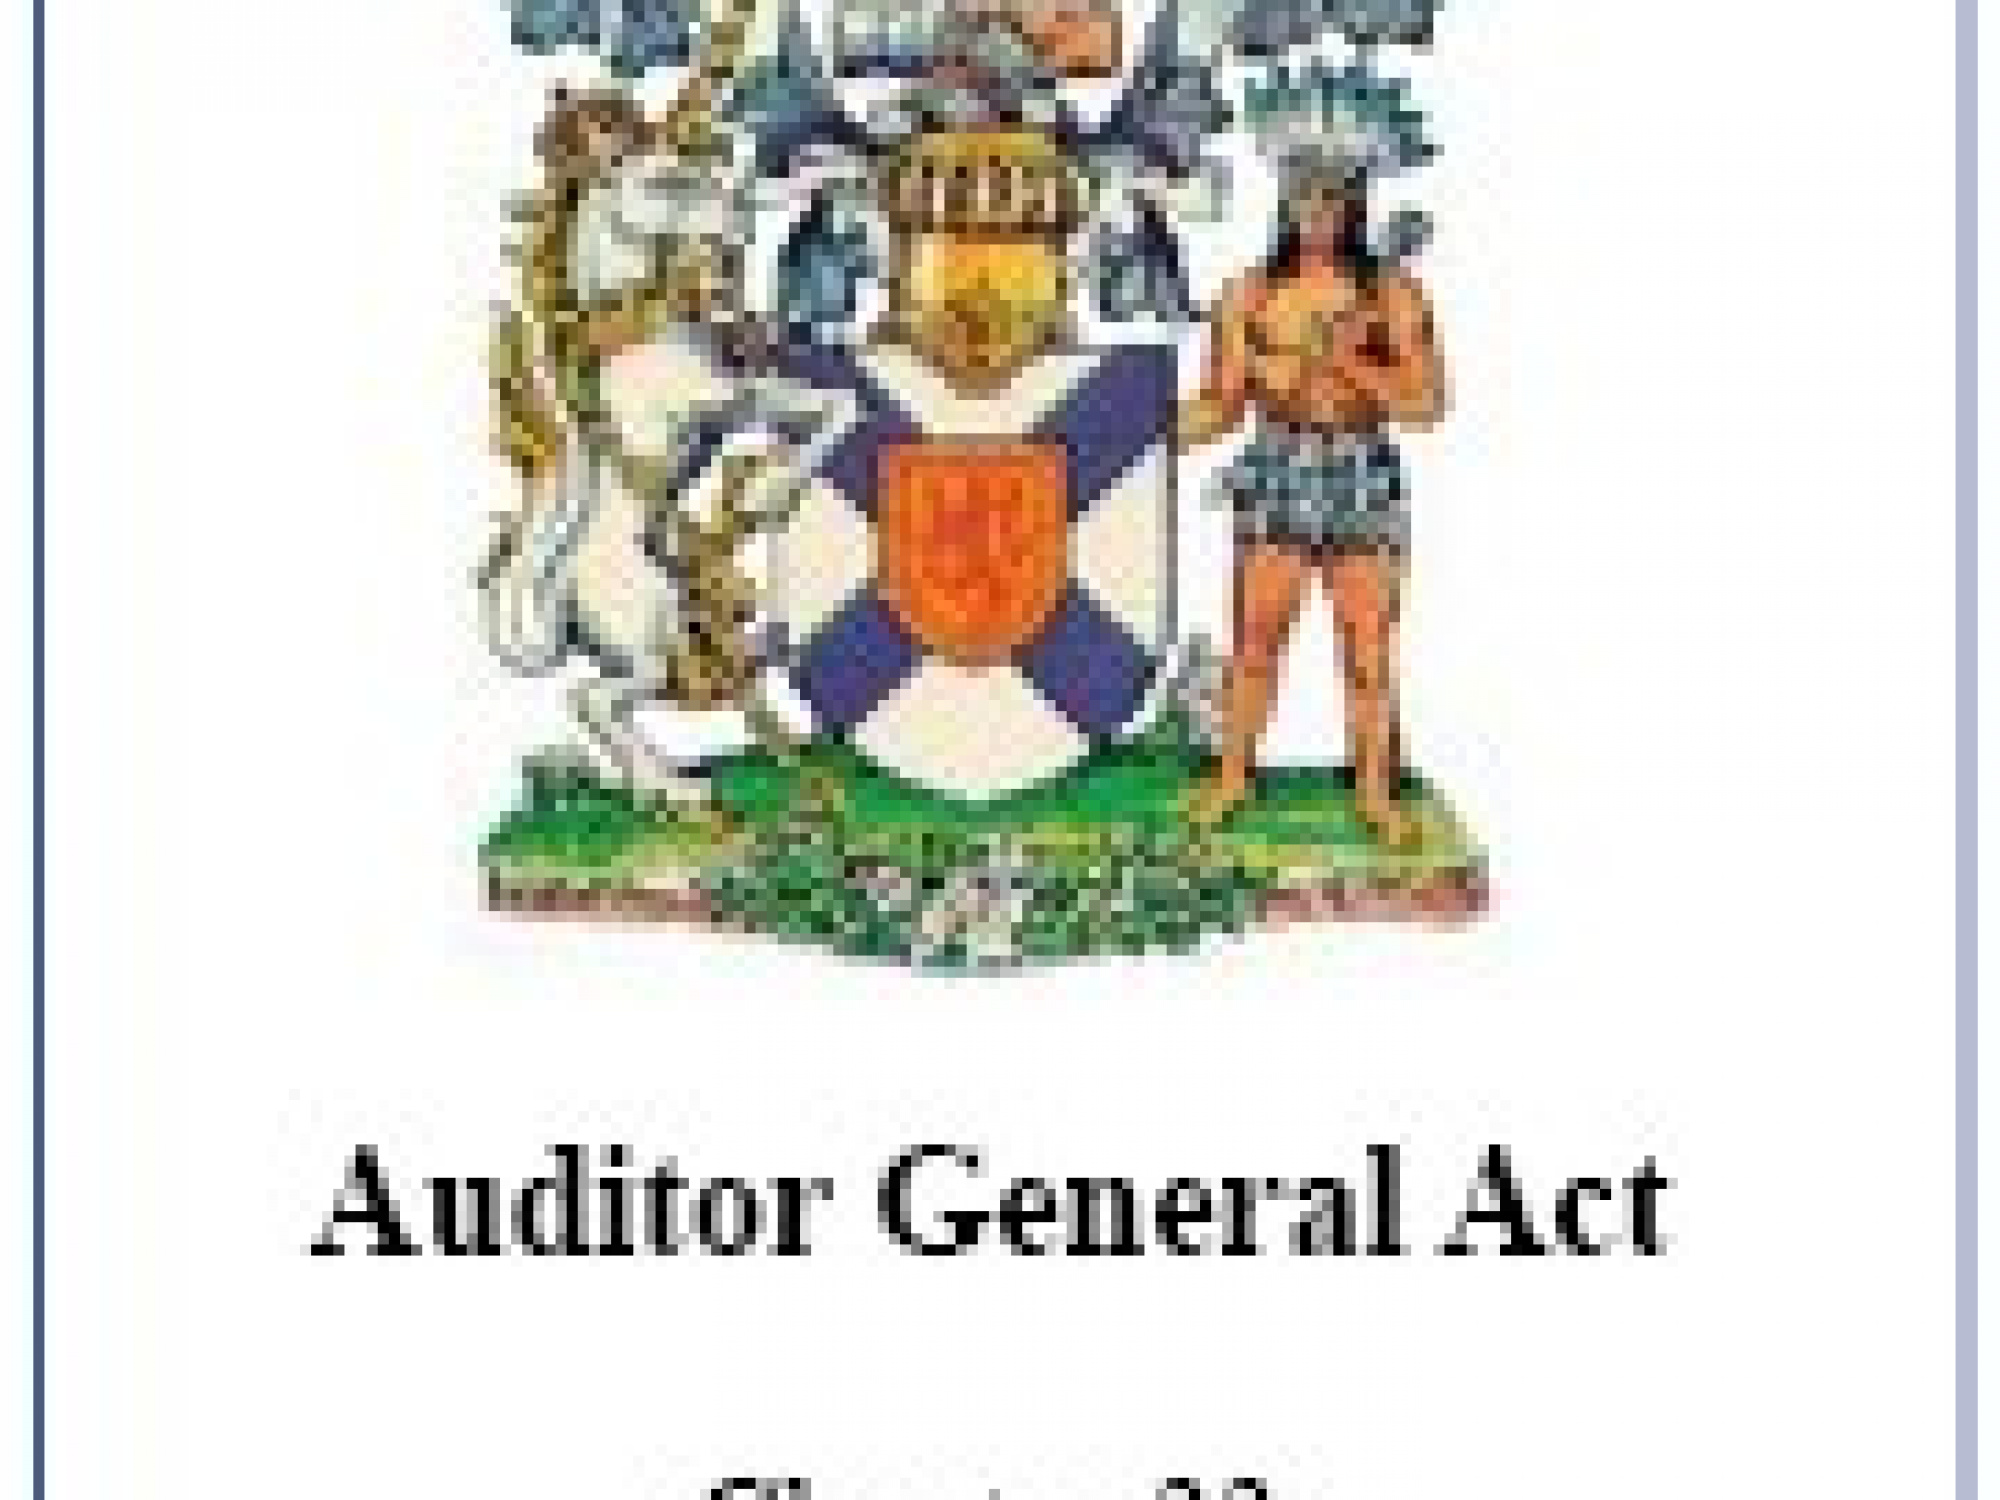 Auditor General Act coat of arms with text "Chapter 33 of the Acts of 2010"